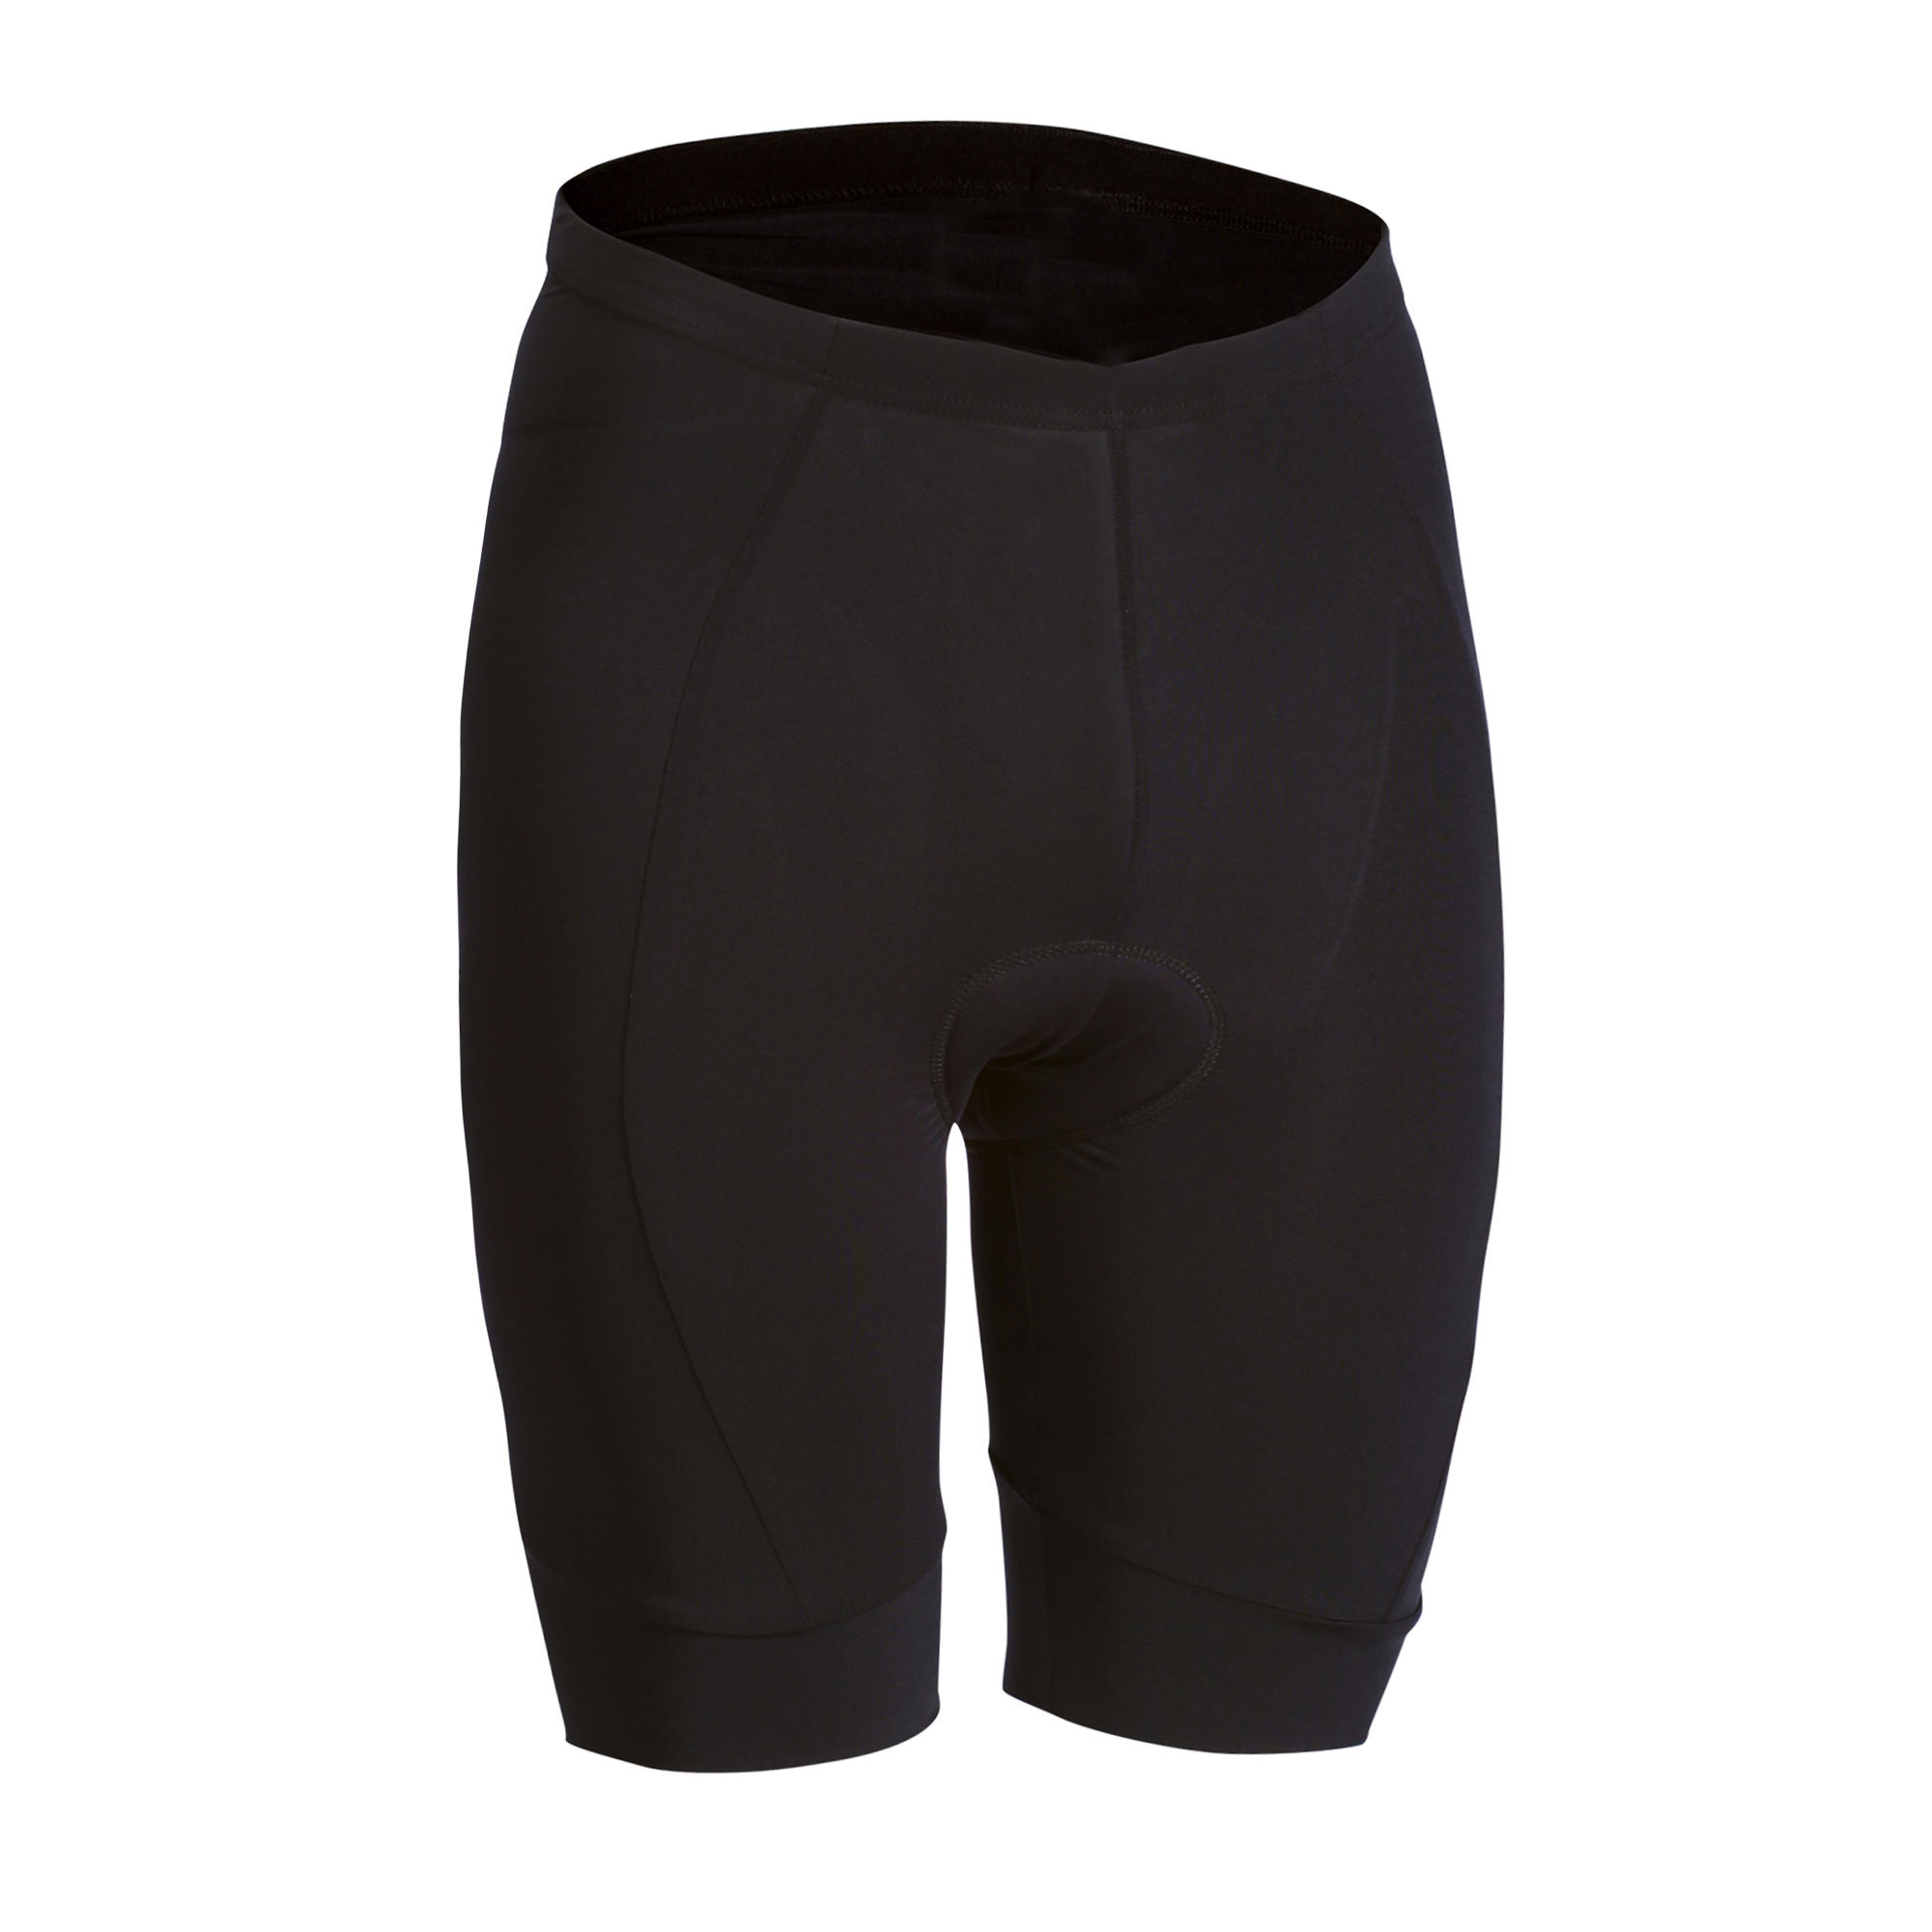 BTWIN Essential Bibless Road Cycling Shorts - Black